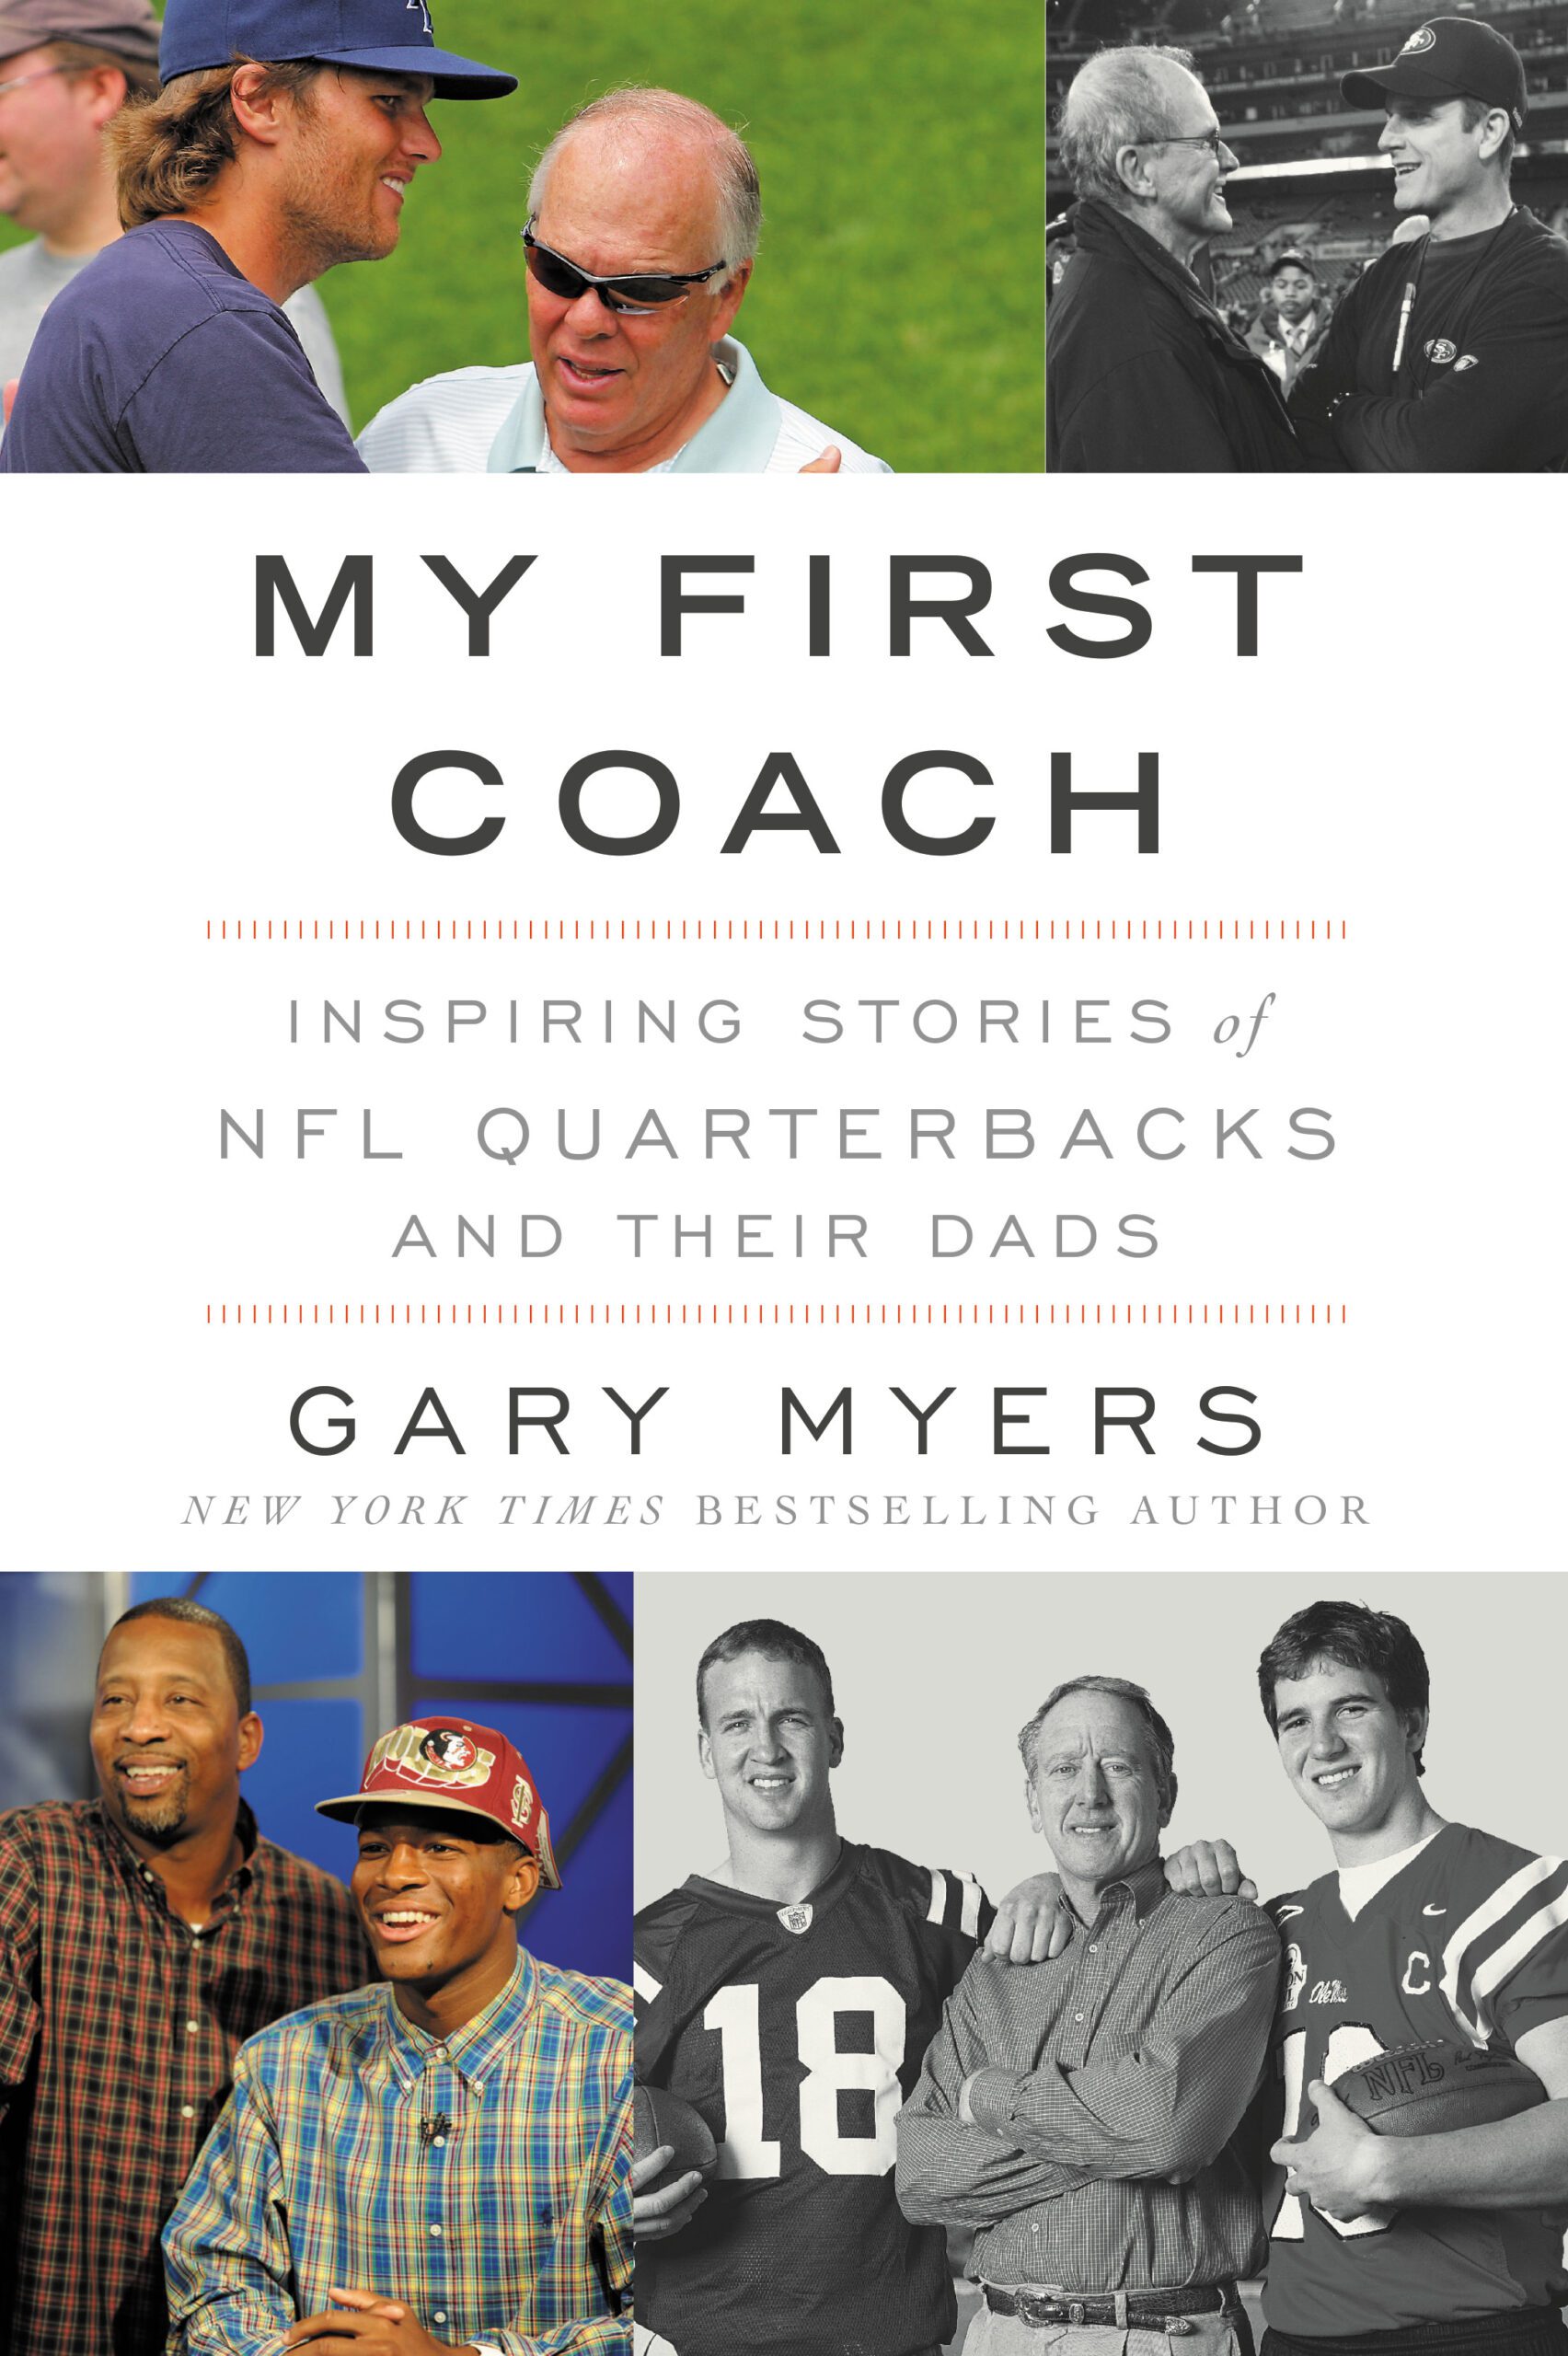 my-first-coach-gary-myers-book-publicist-dallas